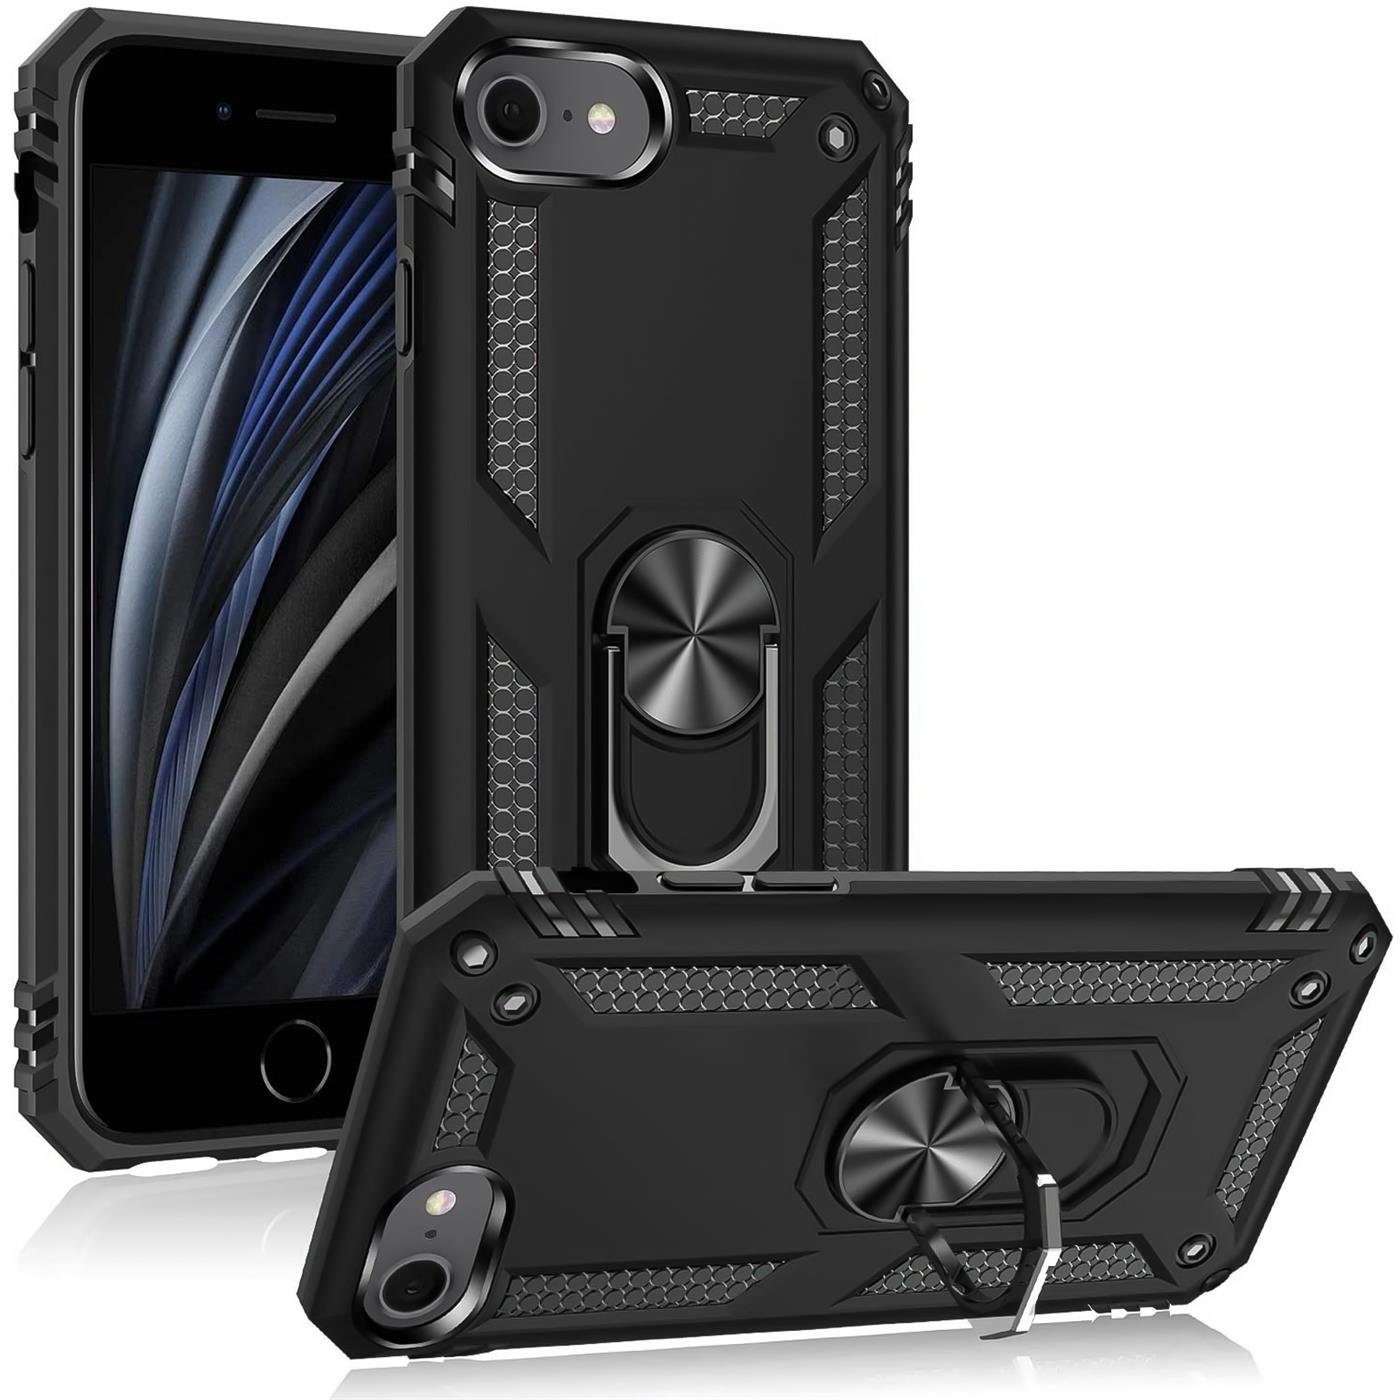 CoolGadget Handyhülle Armor Shield Case für iPhone SE 2020 2022, iPhone 7 /  8 4,7 Zoll, Outdoor Cover Magnet Ringhalterung Handy Hülle für iPhone SE 2.  3. Gen